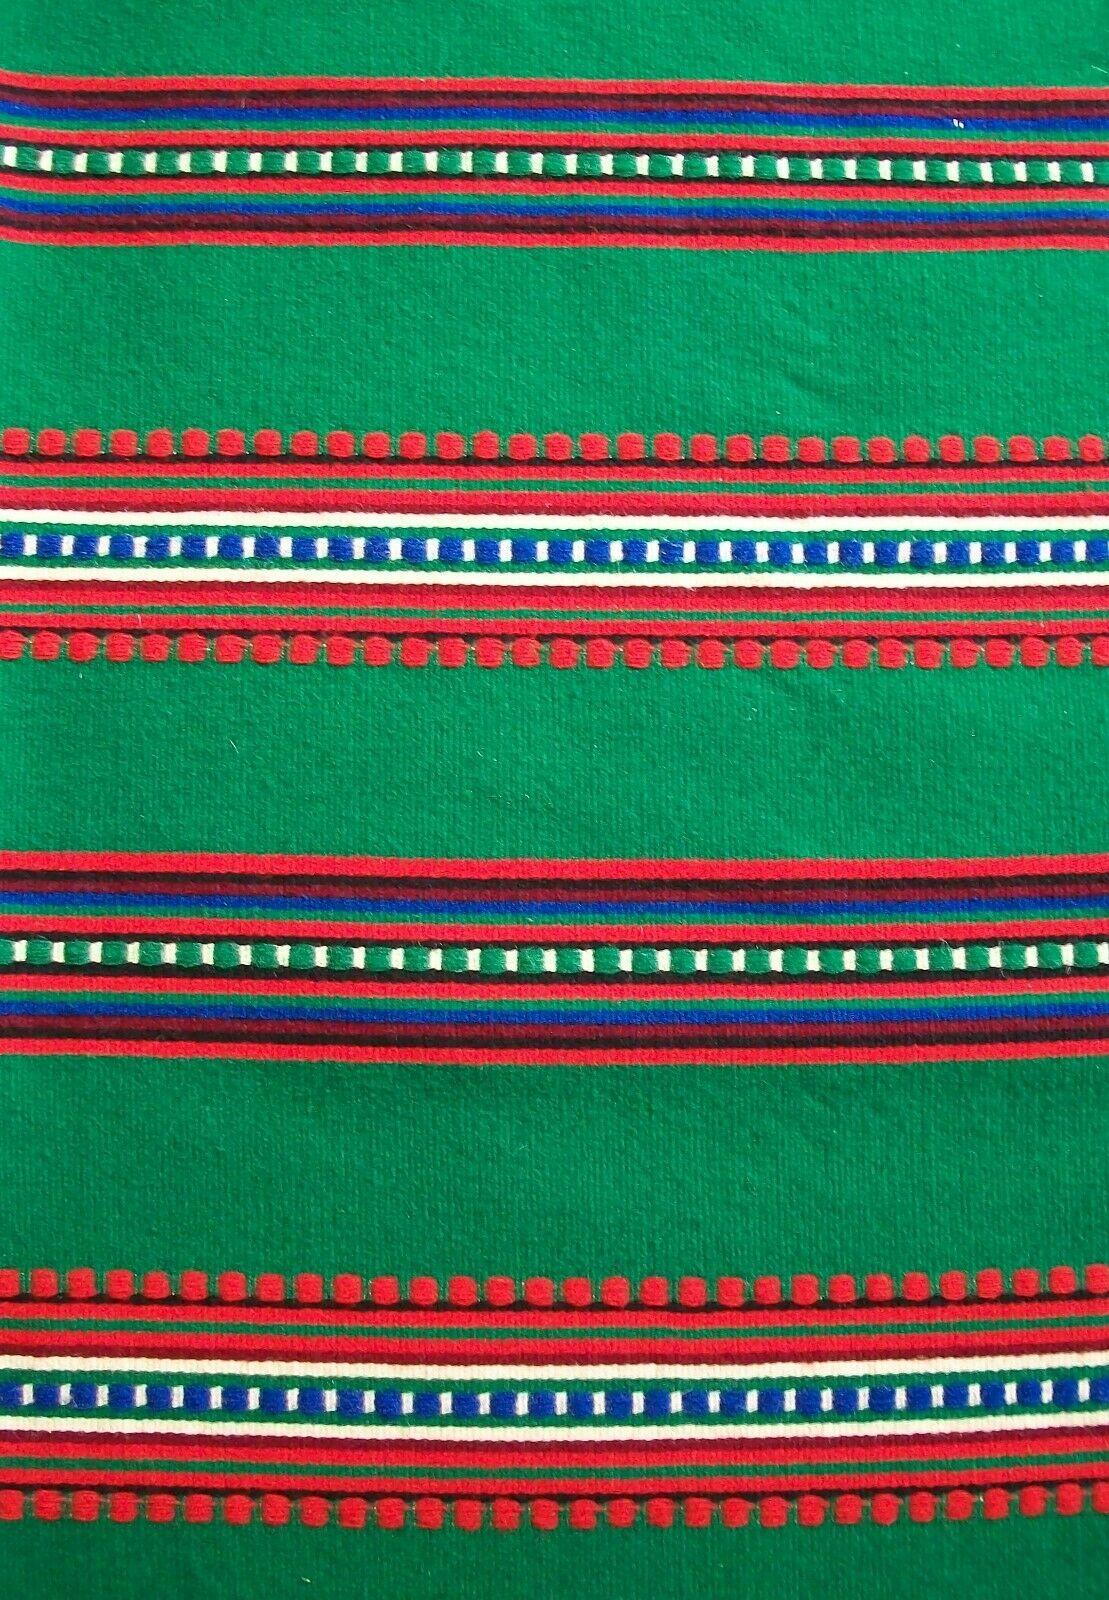 Hand-Crafted Vintage Embroidered Wool Serape Blanket or Rug, Mexico, C.1970's For Sale